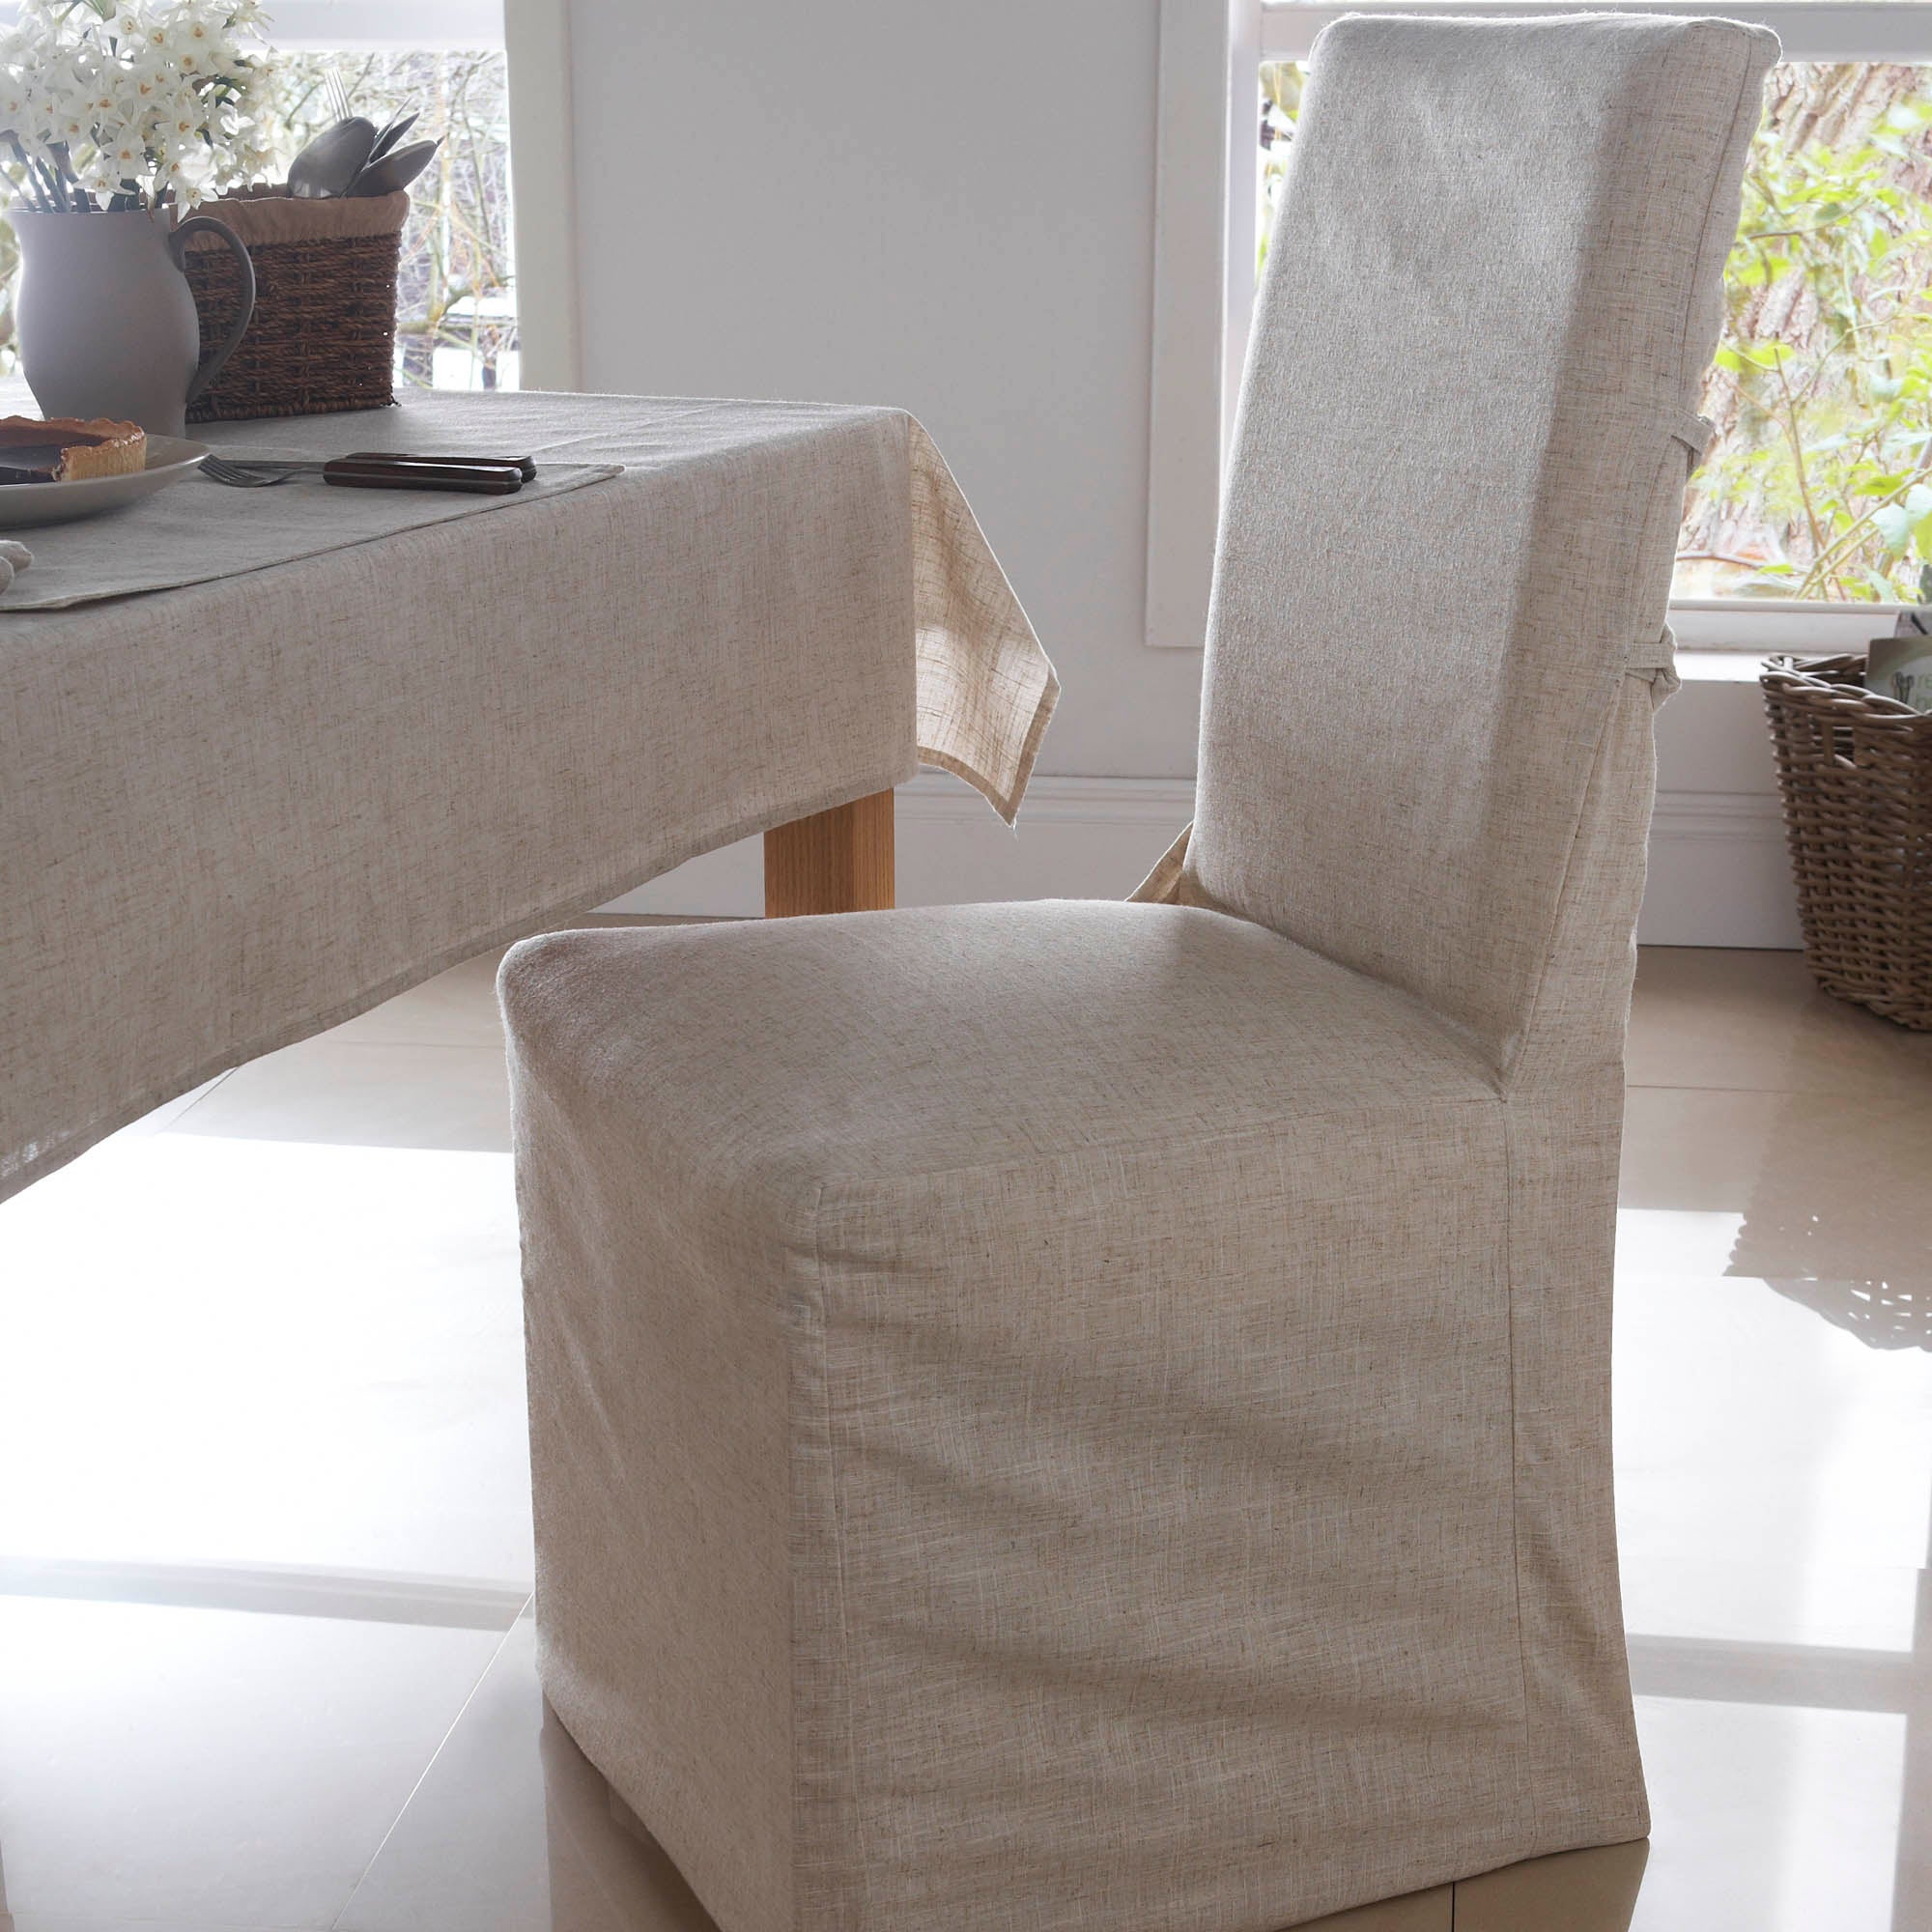 12 50 For Polylinen Pack Of 2 Chair Covers Light Brown Natural Deal Direct Co Uk